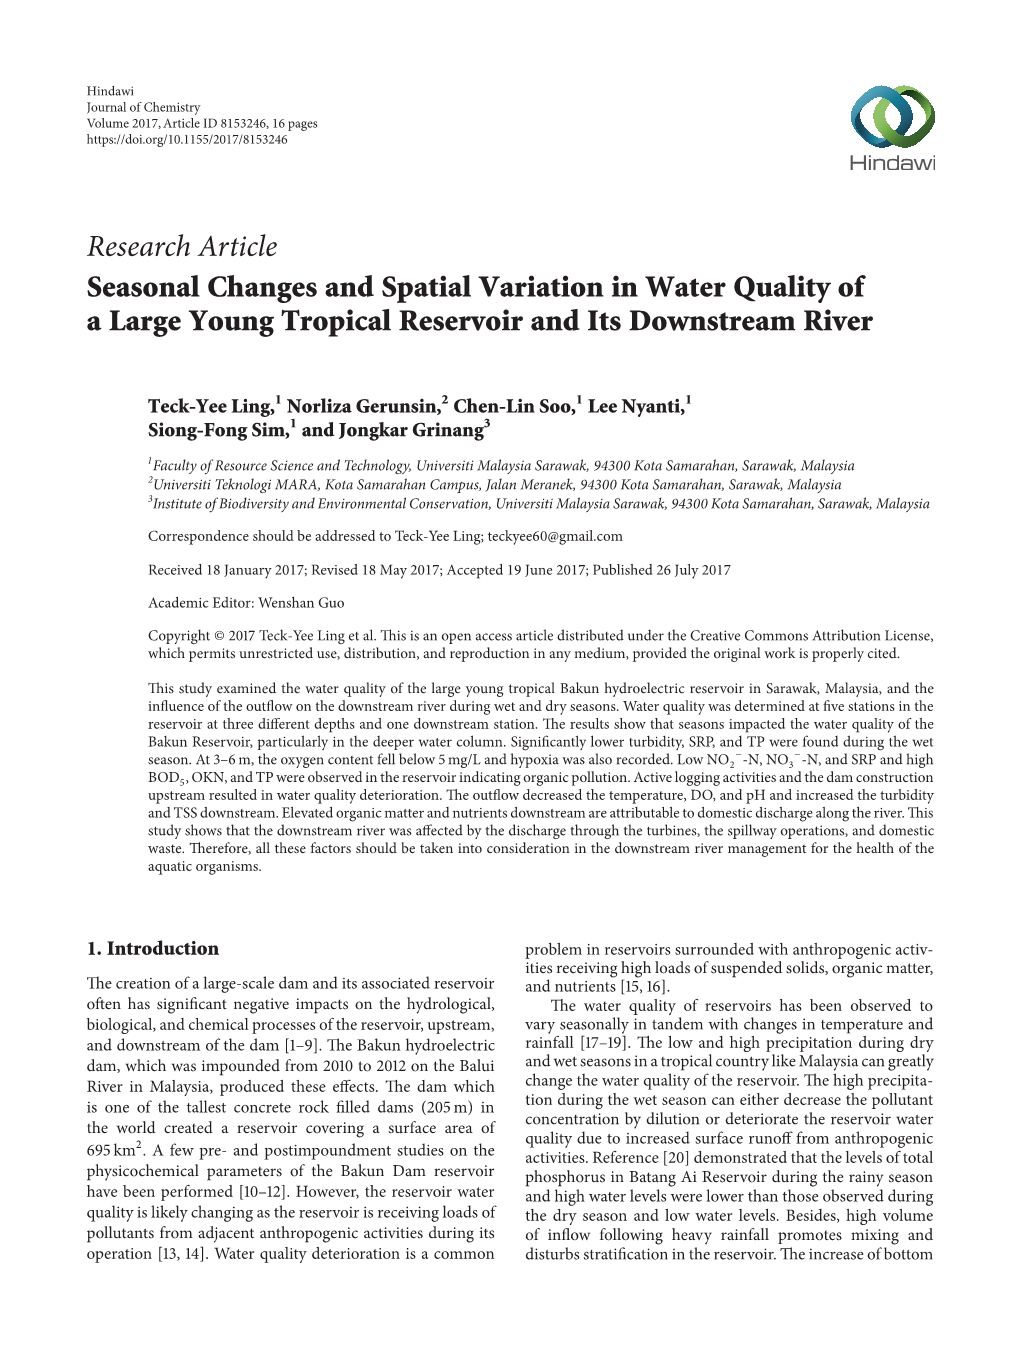 Seasonal Changes and Spatial Variation in Water Quality of a Large Young Tropical Reservoir and Its Downstream River